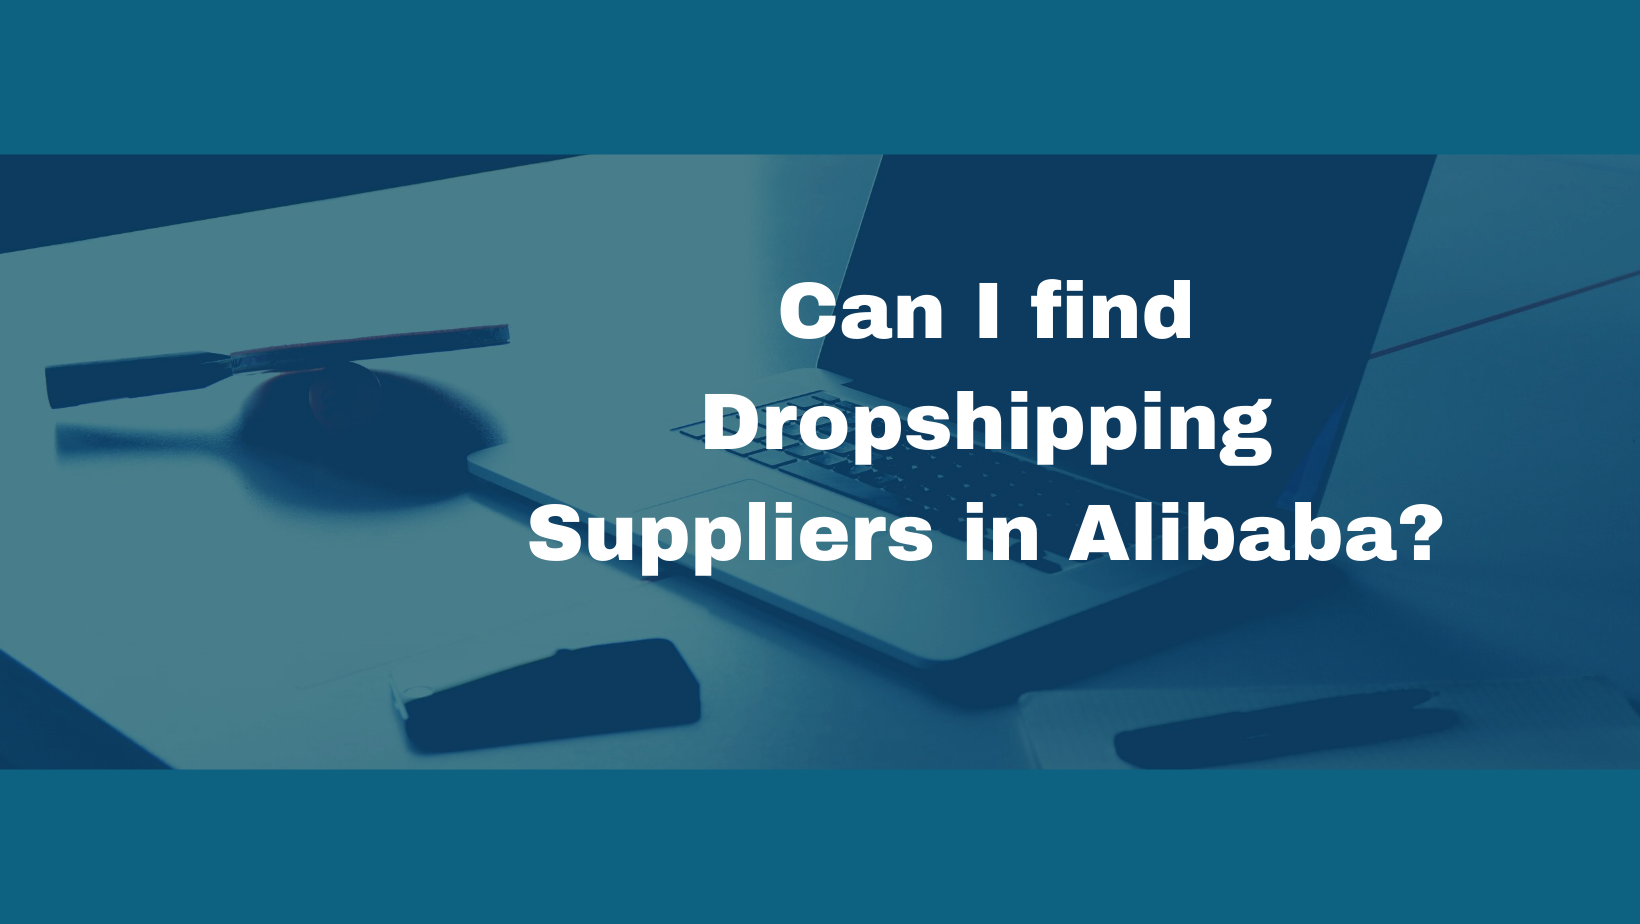 Rich result on Google's SERP in searching for "dropshipping suppliers in alibaba"